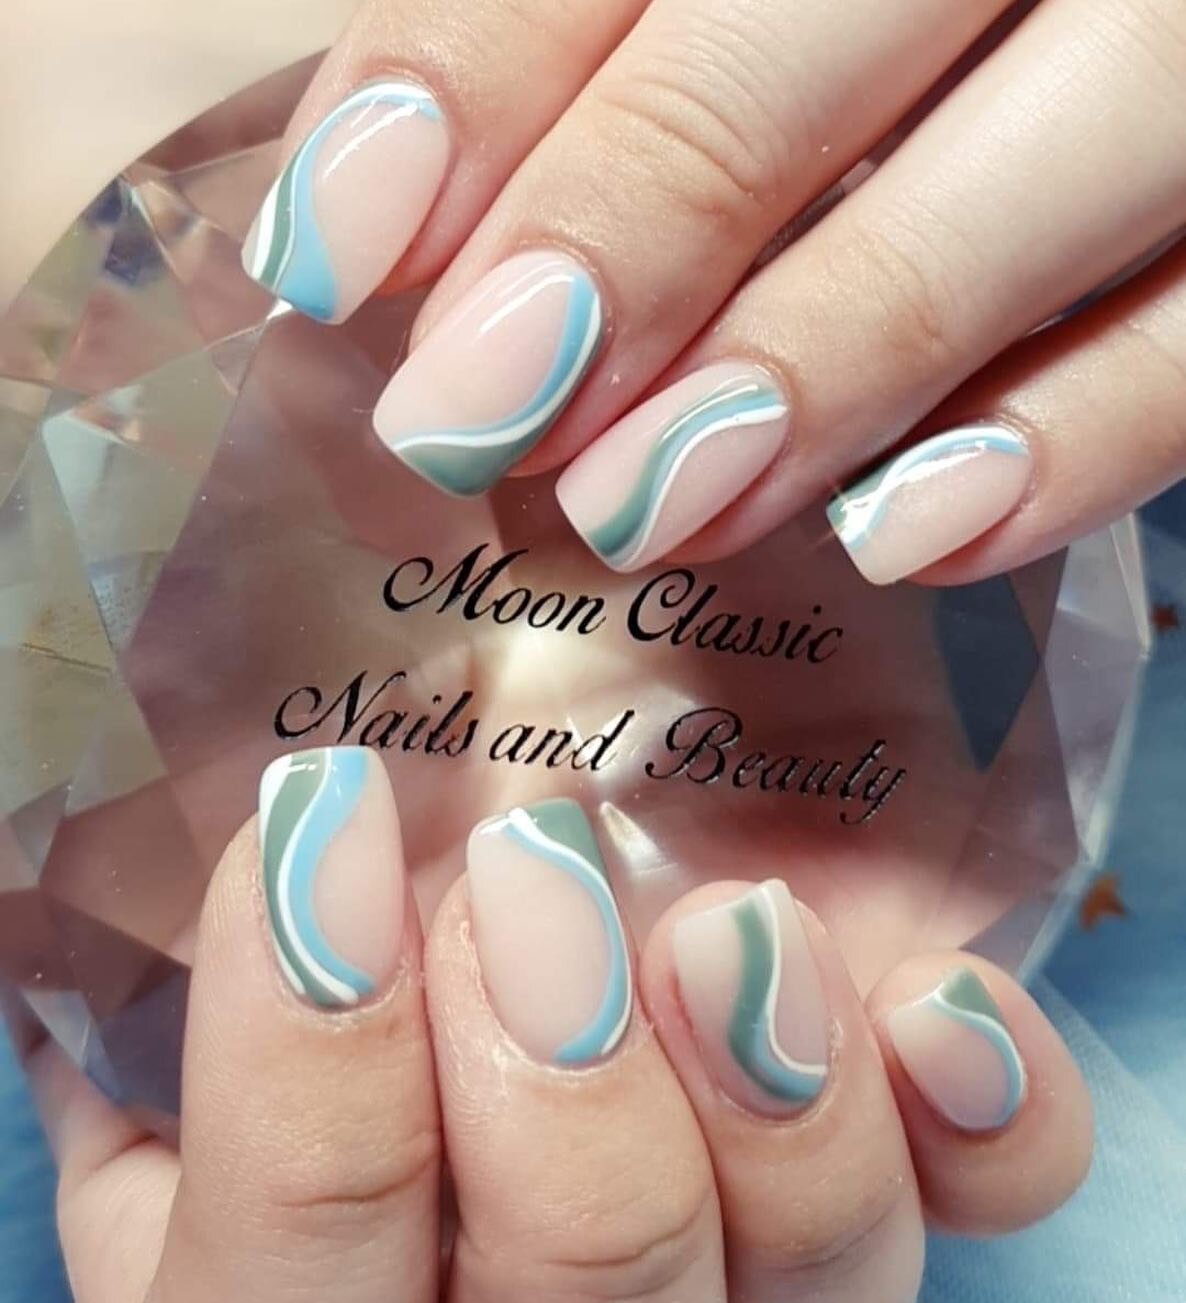 To the moon beauty studio - Exeter - Book Online - Prices, Reviews, Photos